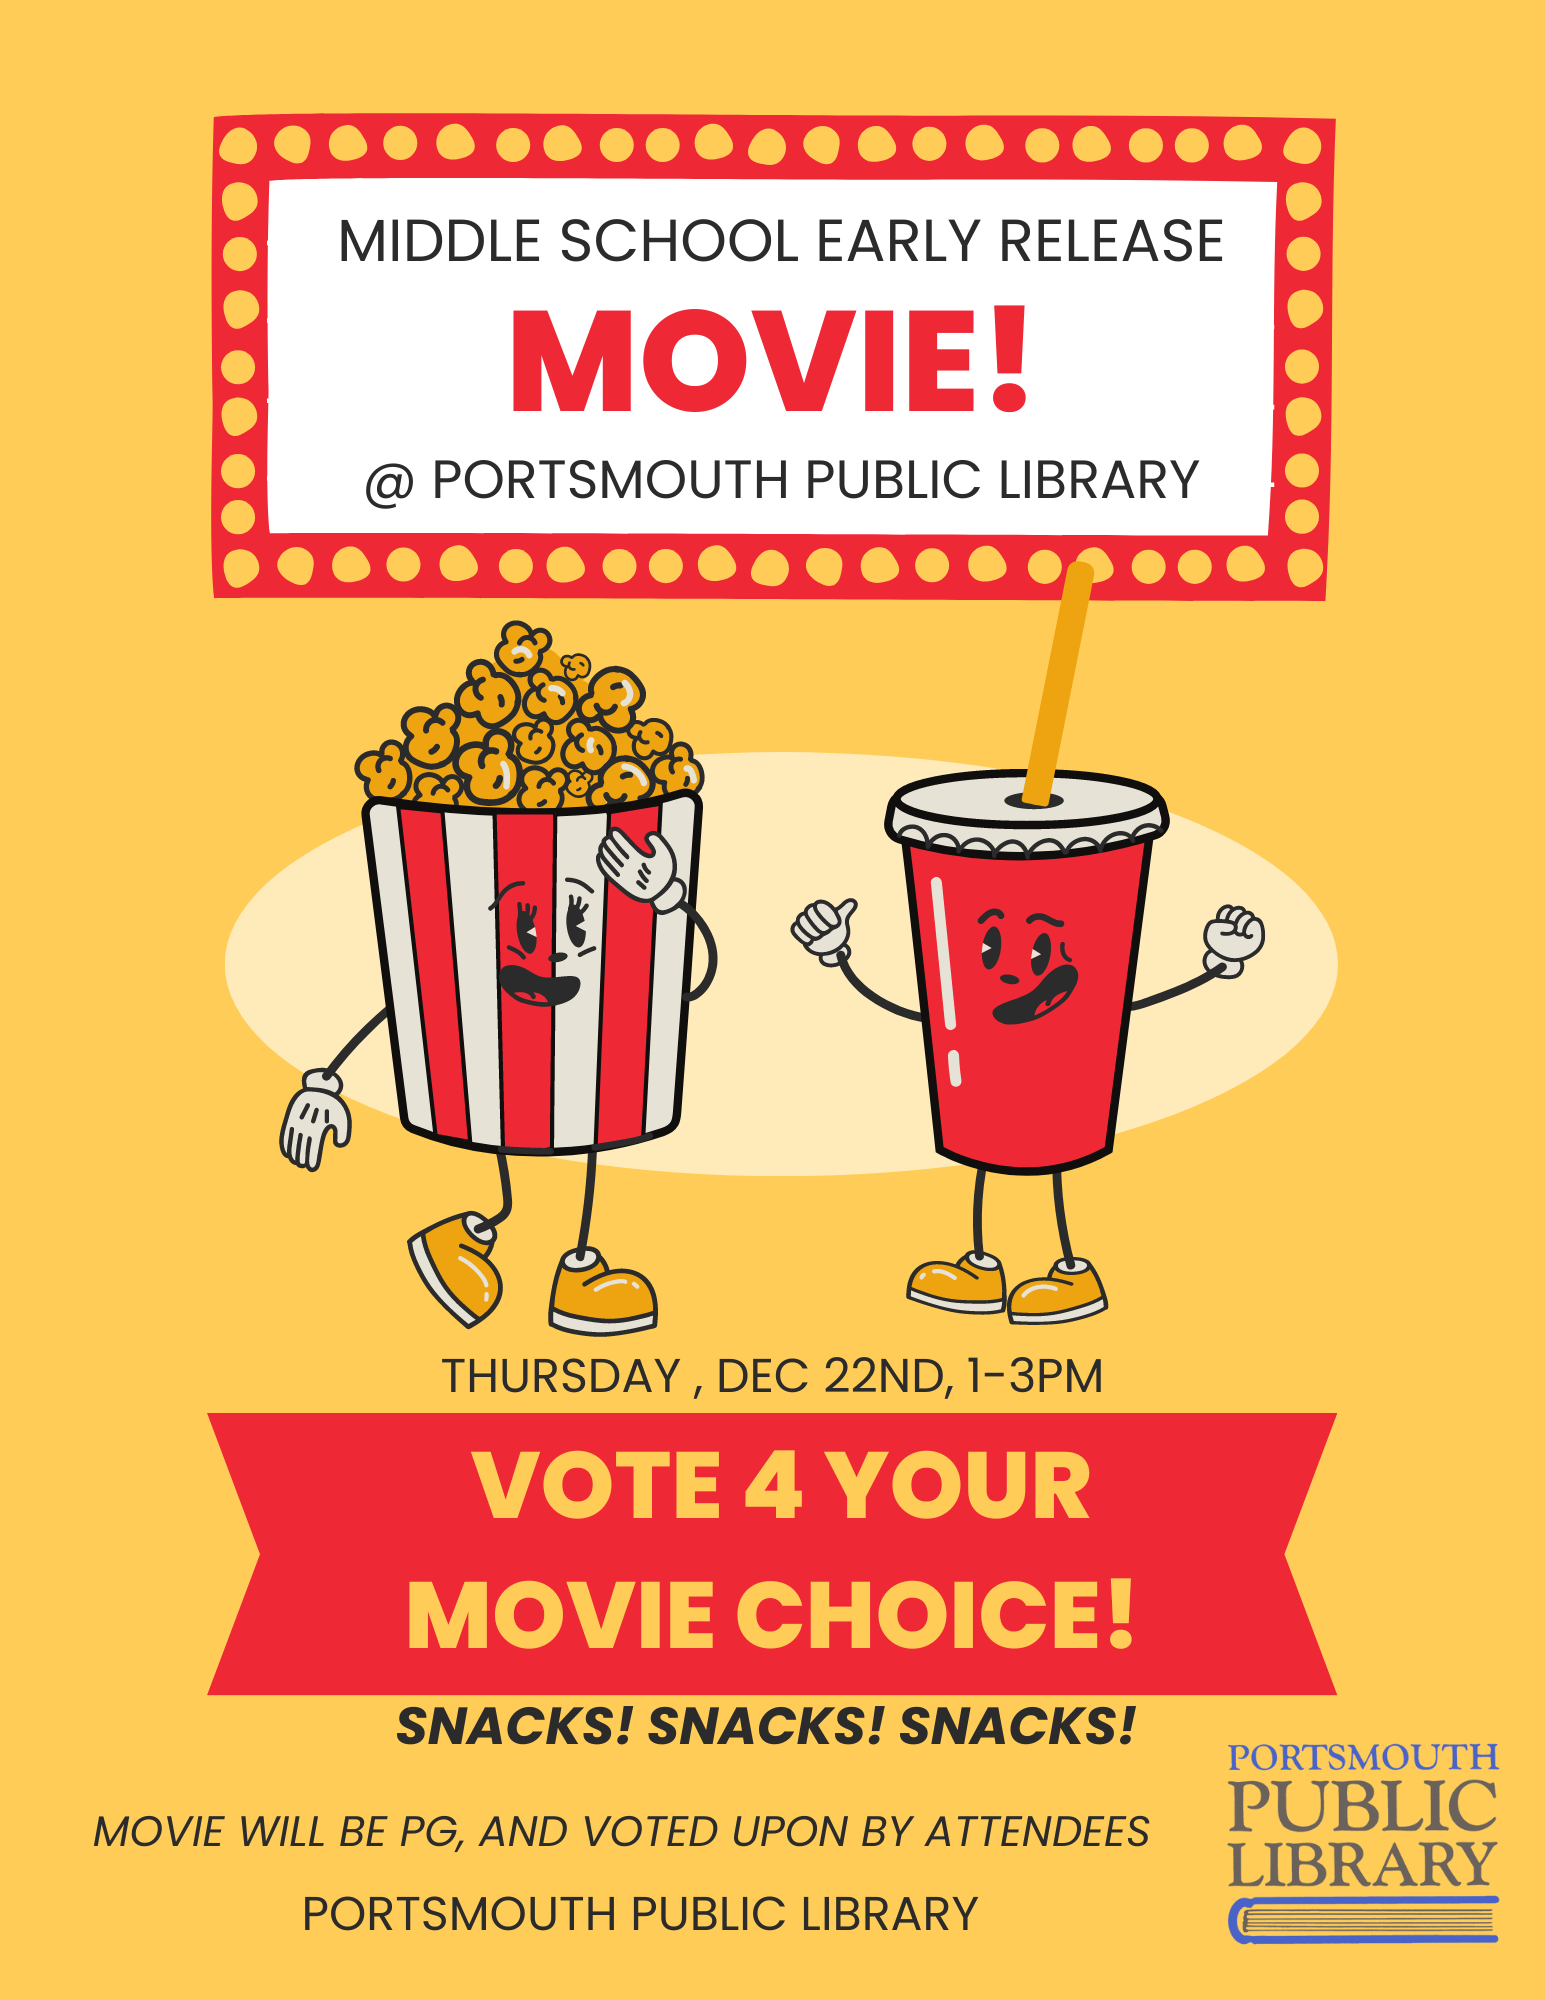 Test reads Middle School Early Release Movie @ Portsmouth Public Library. Thursday, December 22nd, 1-3pm. Vote for your movie choice. Snacks! Snacks! Snacks! Movie will be PG and will be voted upon by attendees. Portsmouth Public Library. there is an image of a cartoon popcorn tub and soda in the center, and a logo for Portsmouth Public Library in the lower right corner